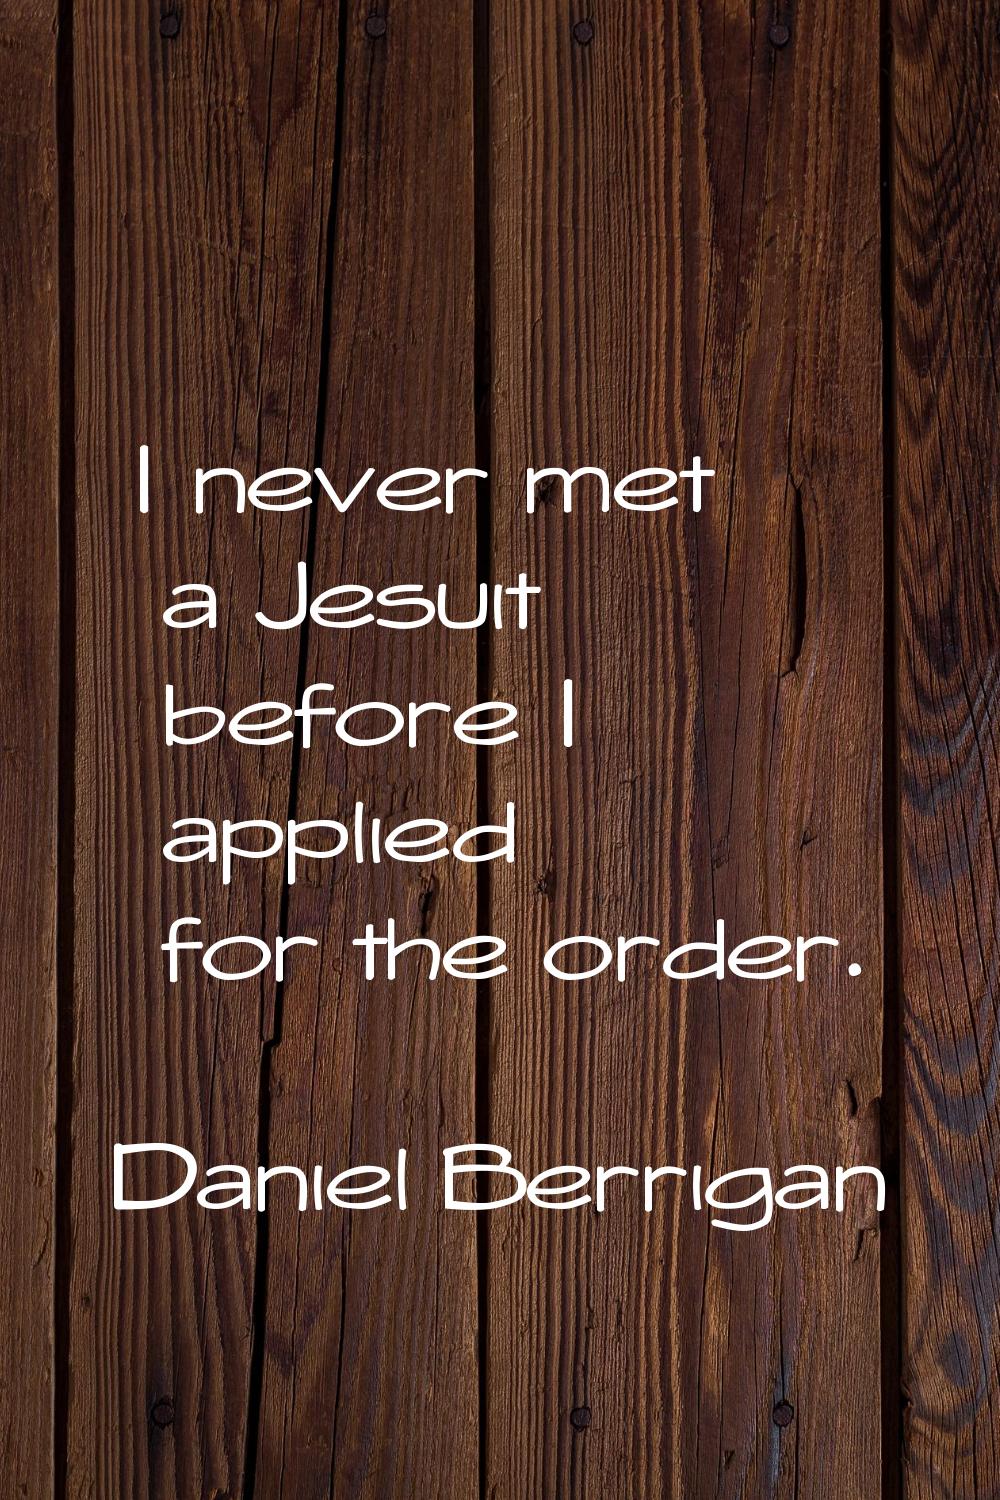 I never met a Jesuit before I applied for the order.